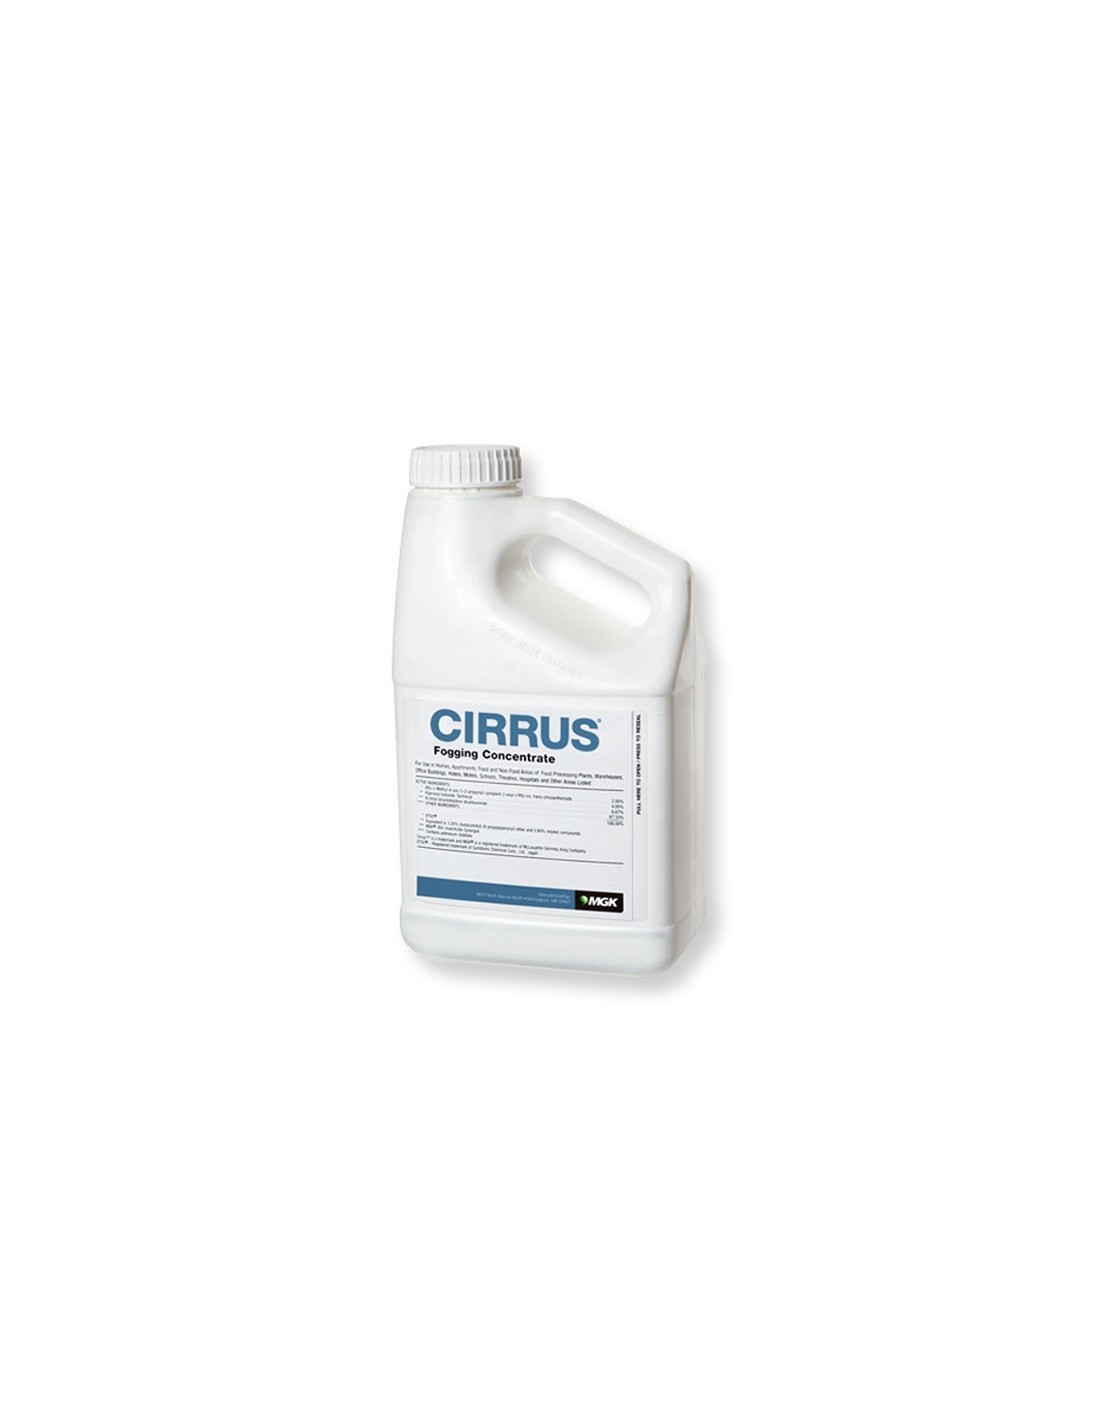 Cirrus Fogging Concentrate Questions & Answers